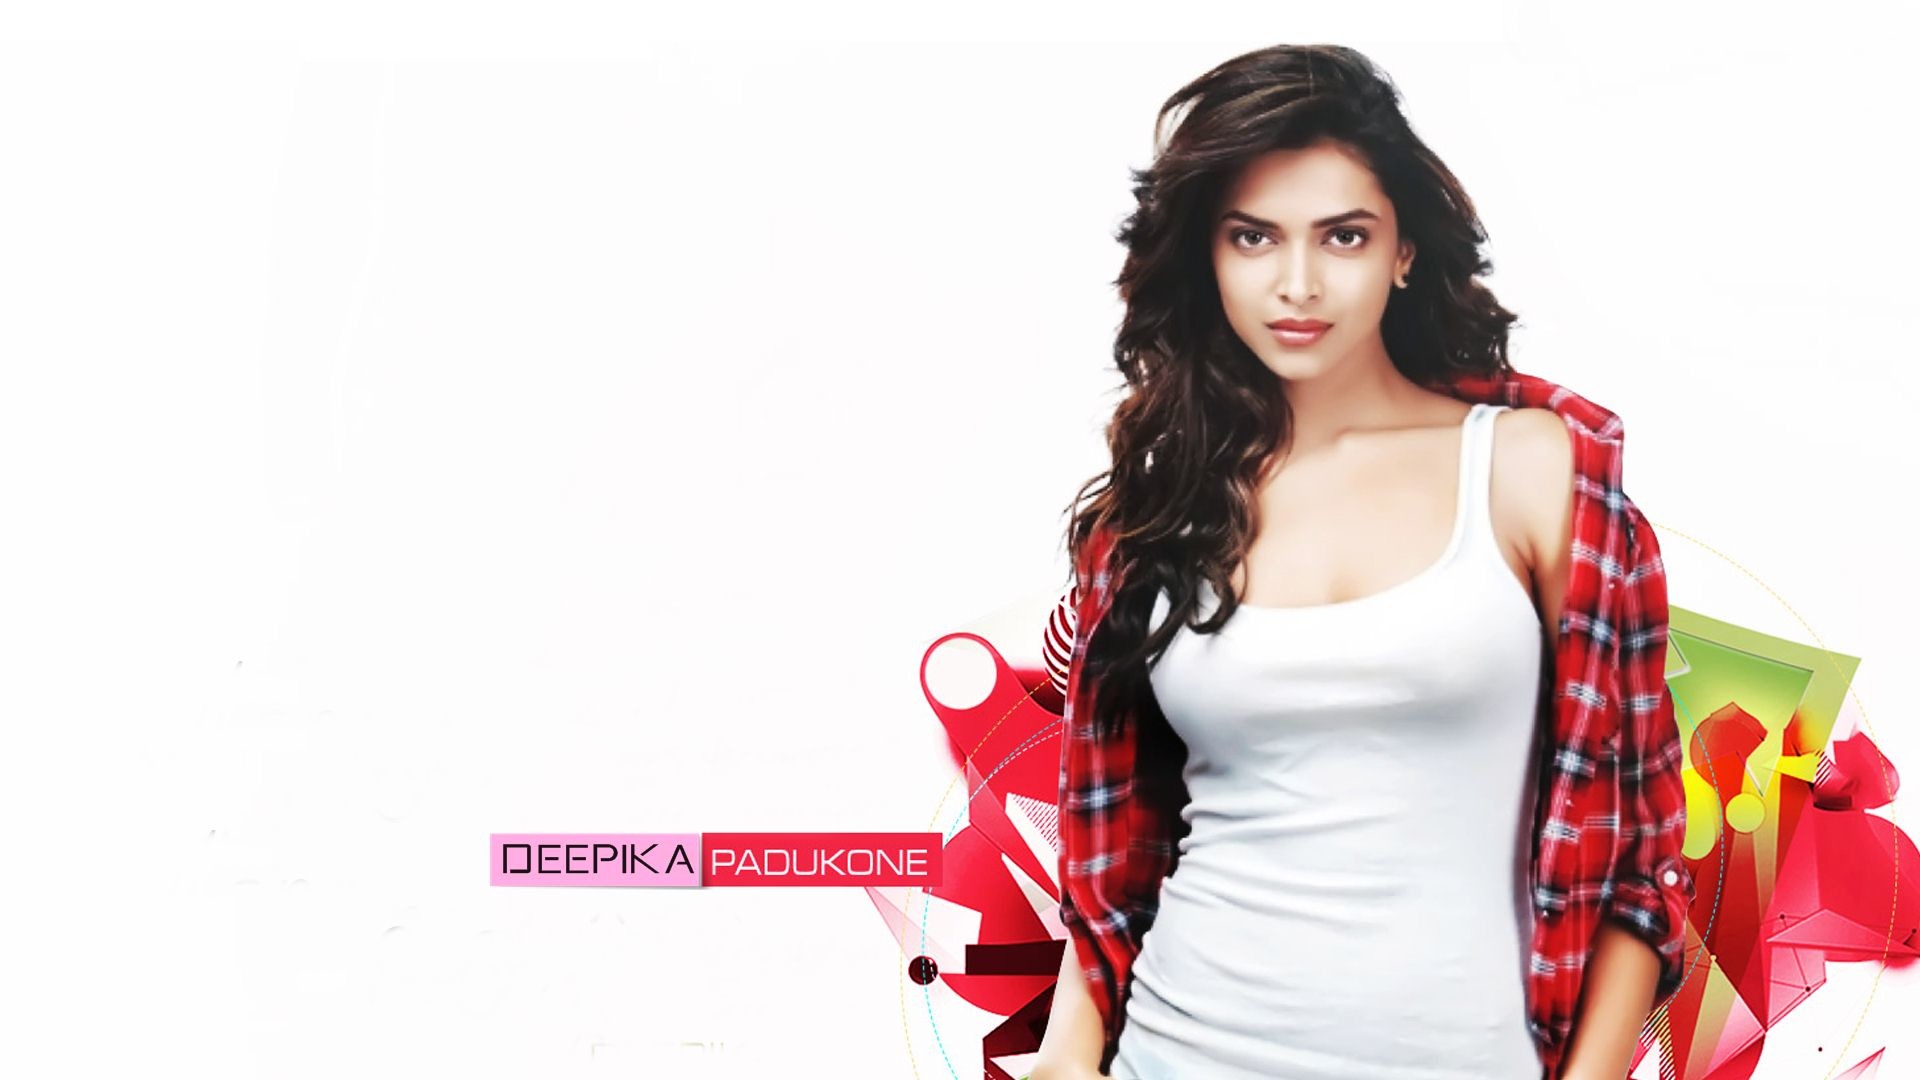 1920x1080 Deepika Padukone HD Wallpapers and Pictures download for free